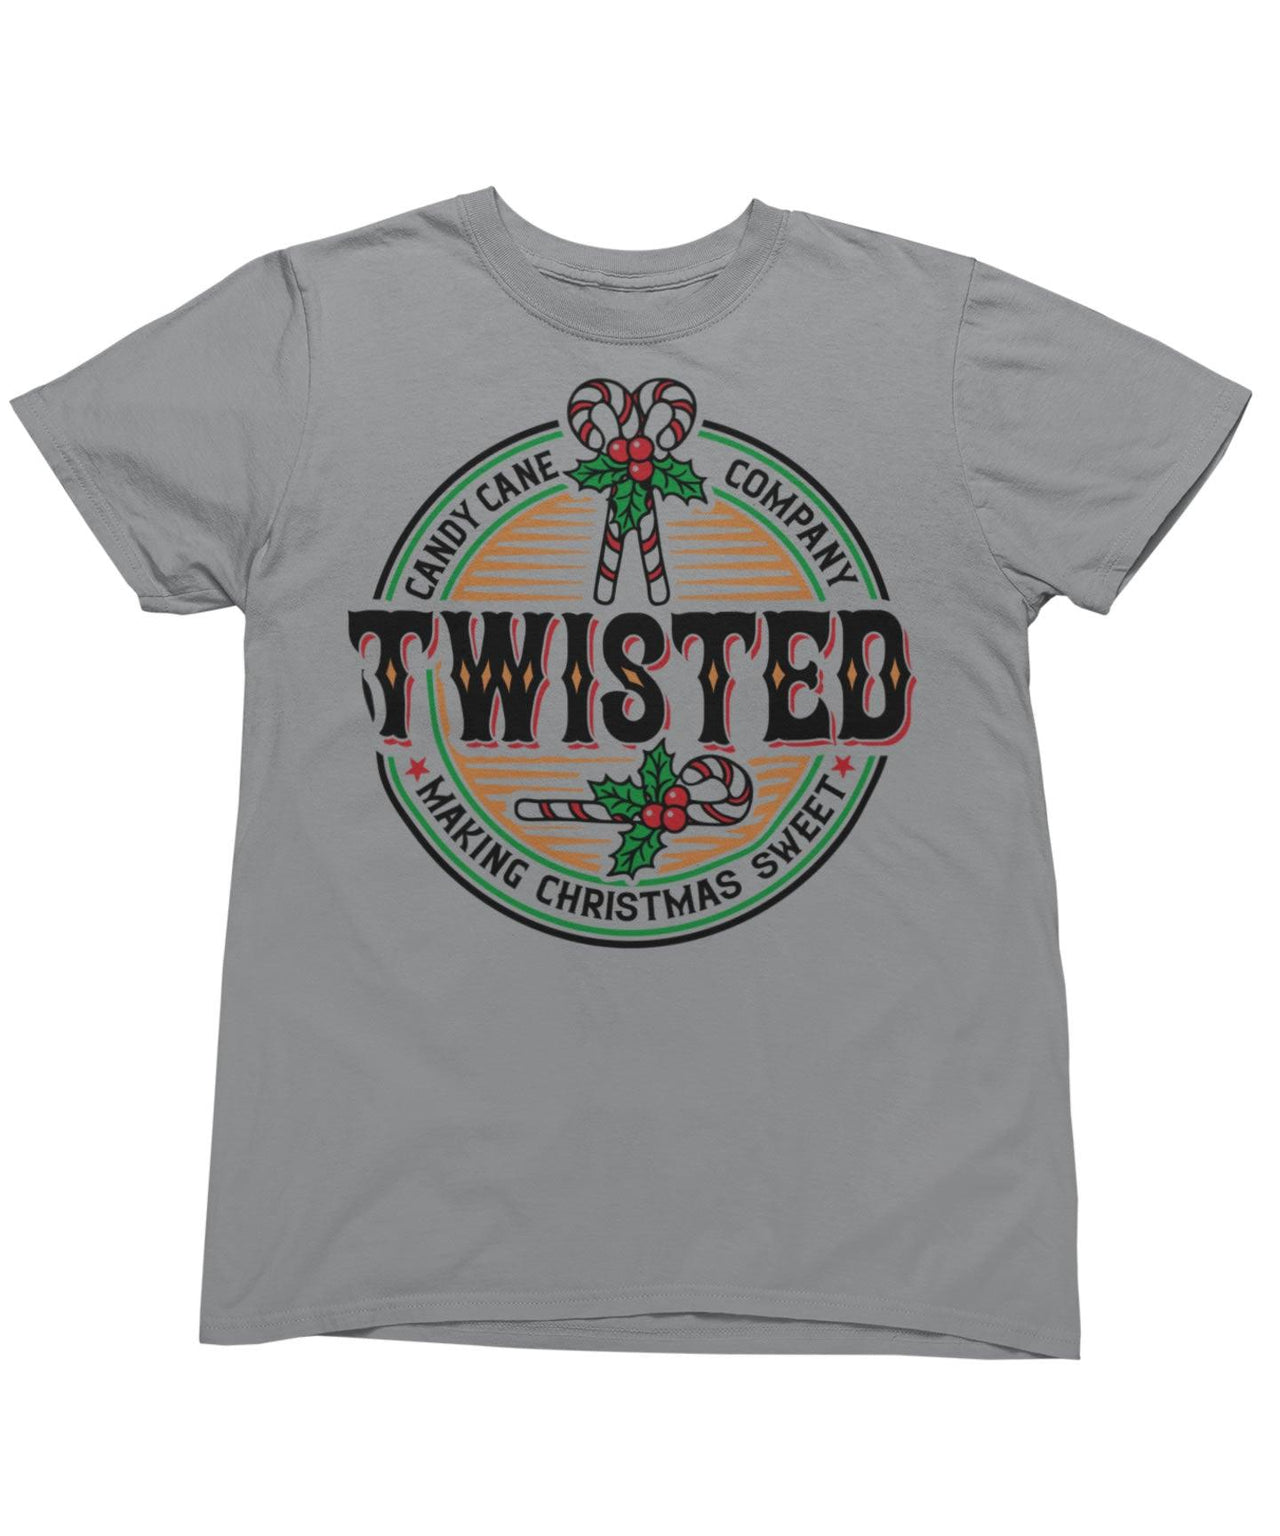 Twisted Candy Canes Christmas Unisex Mens T-Shirt 8Ball